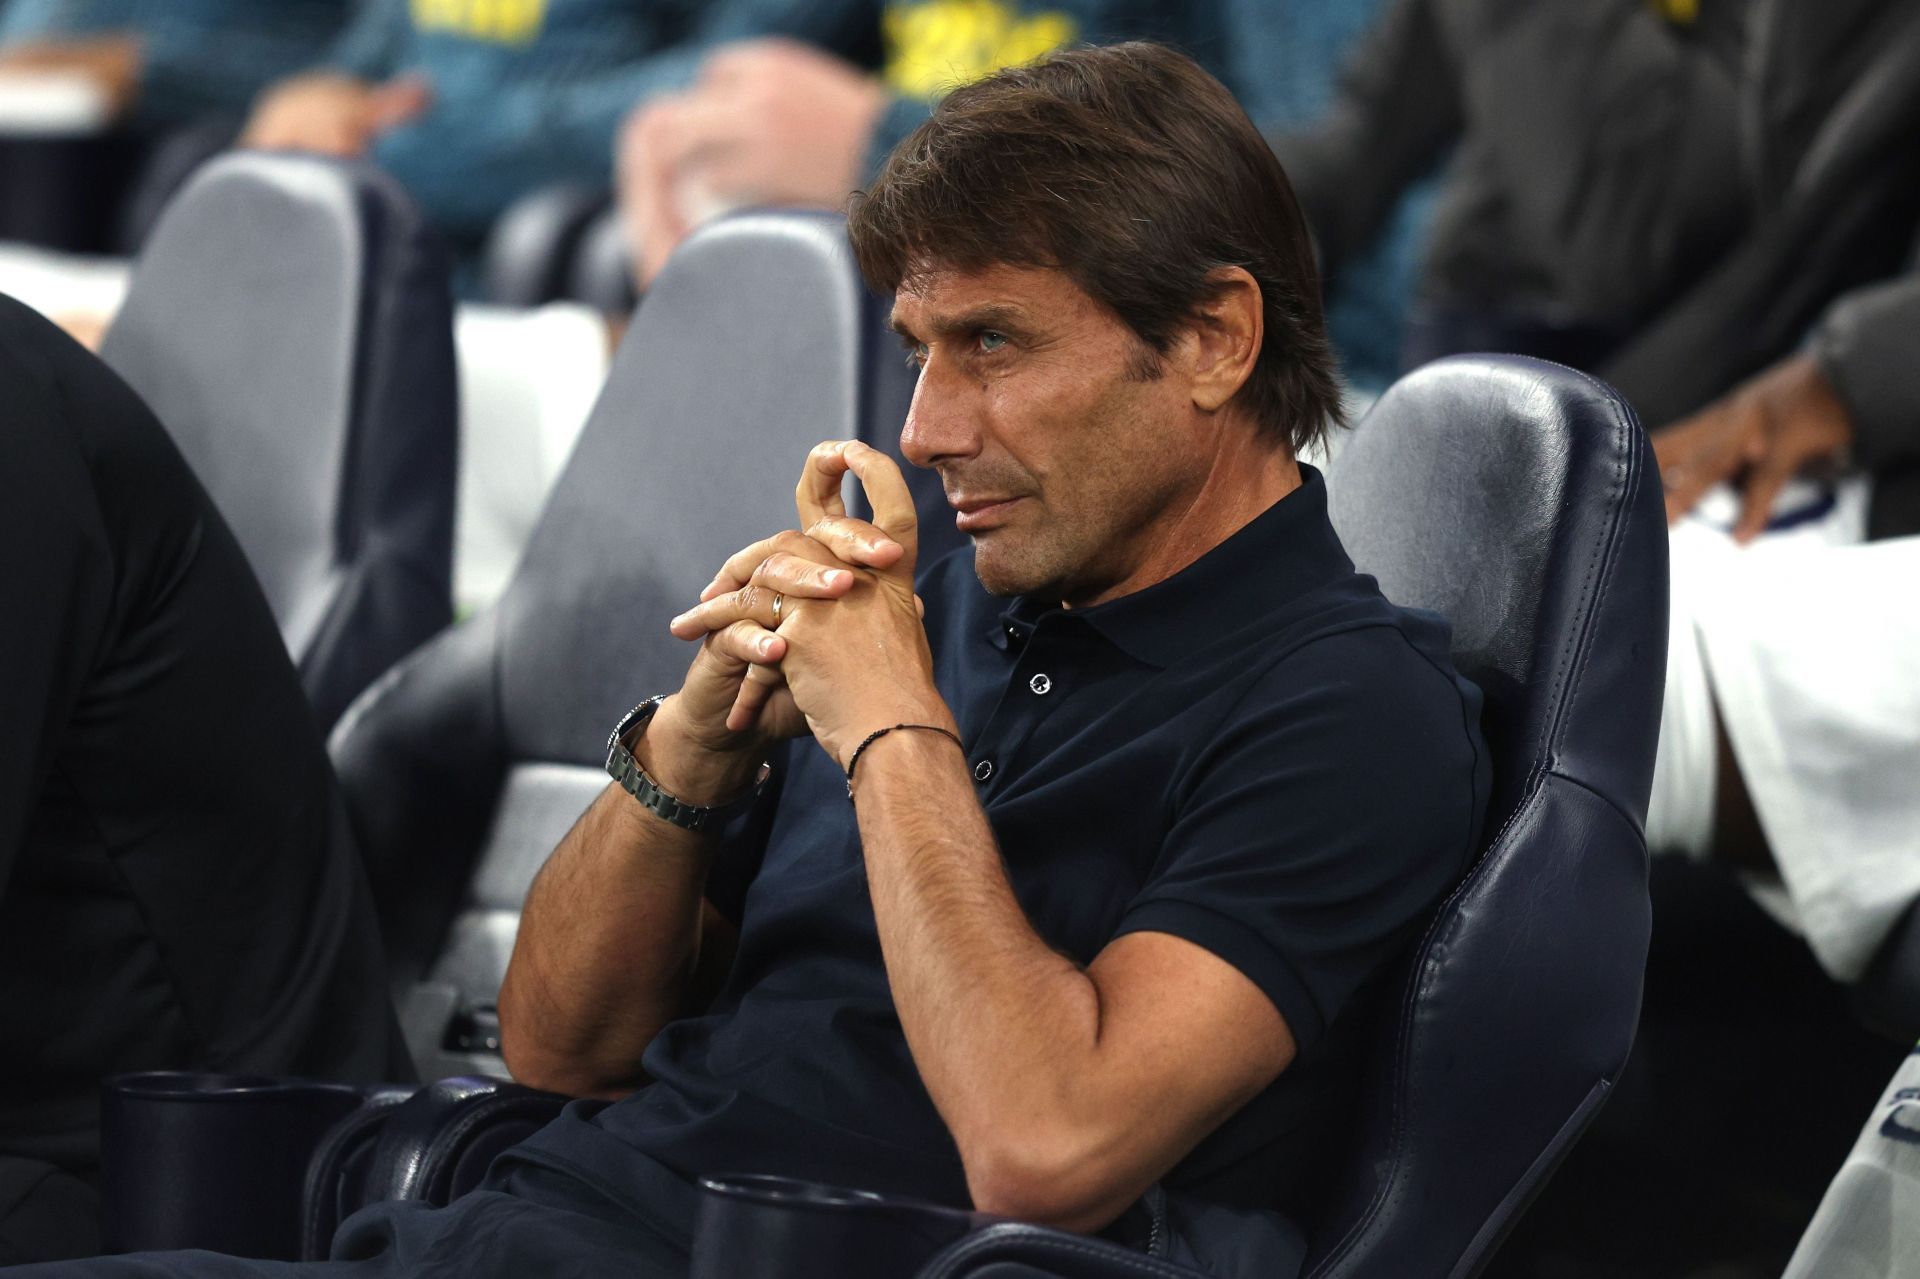 Conte is currently in charge of Tottenham